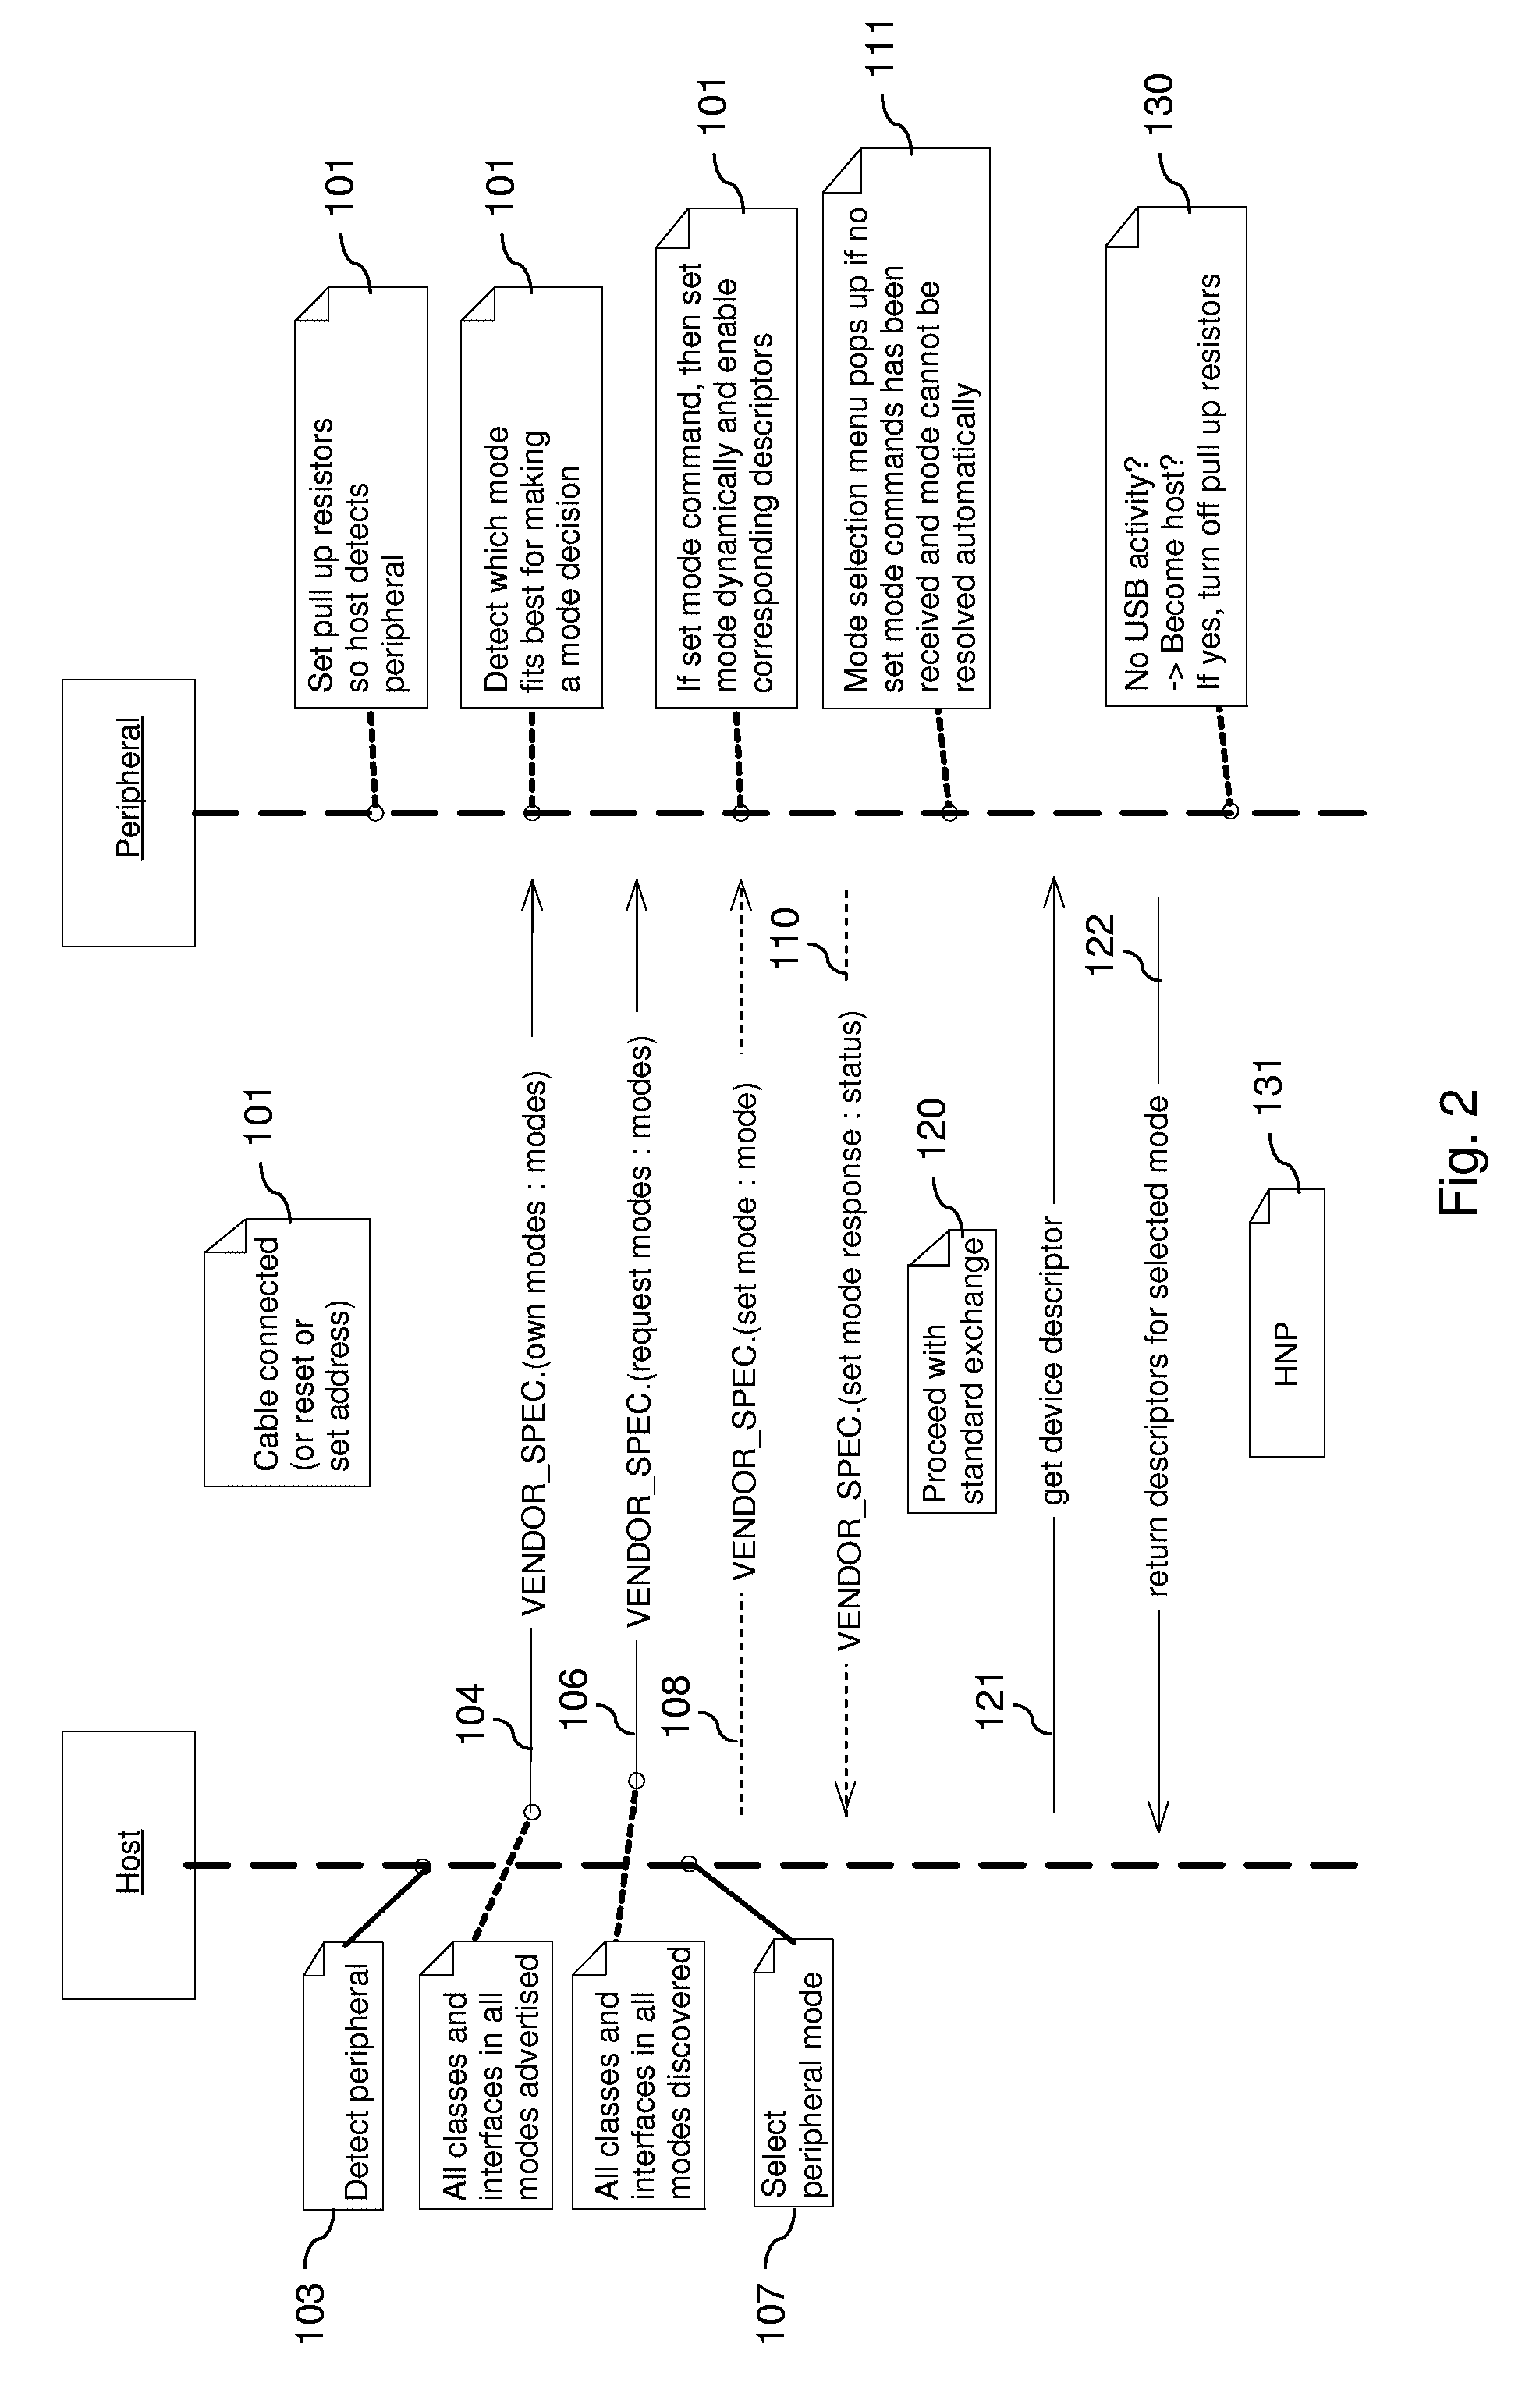 USB device election of becoming a host after receiving information about device capability of the host